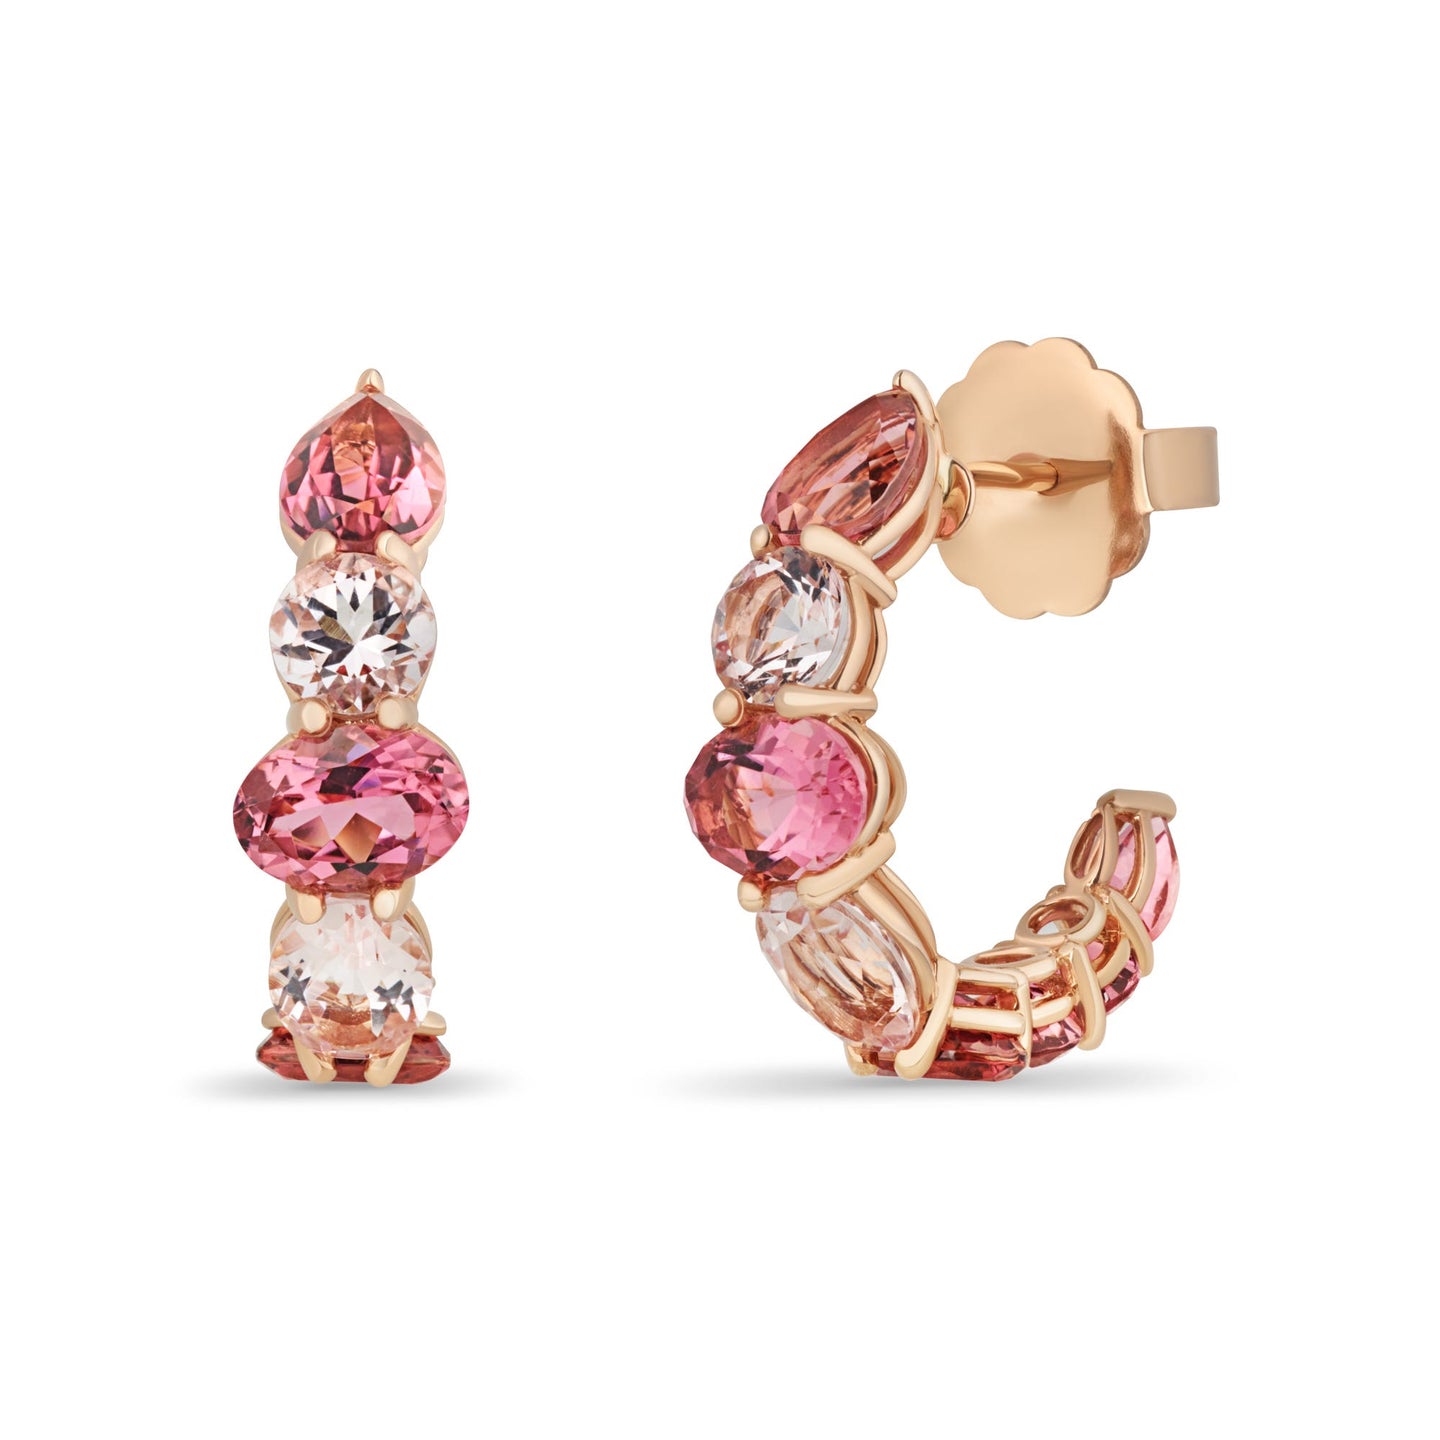 Mini Chaos Earrings in 18ct Rose Gold with Morganite and Pink Tourmaline